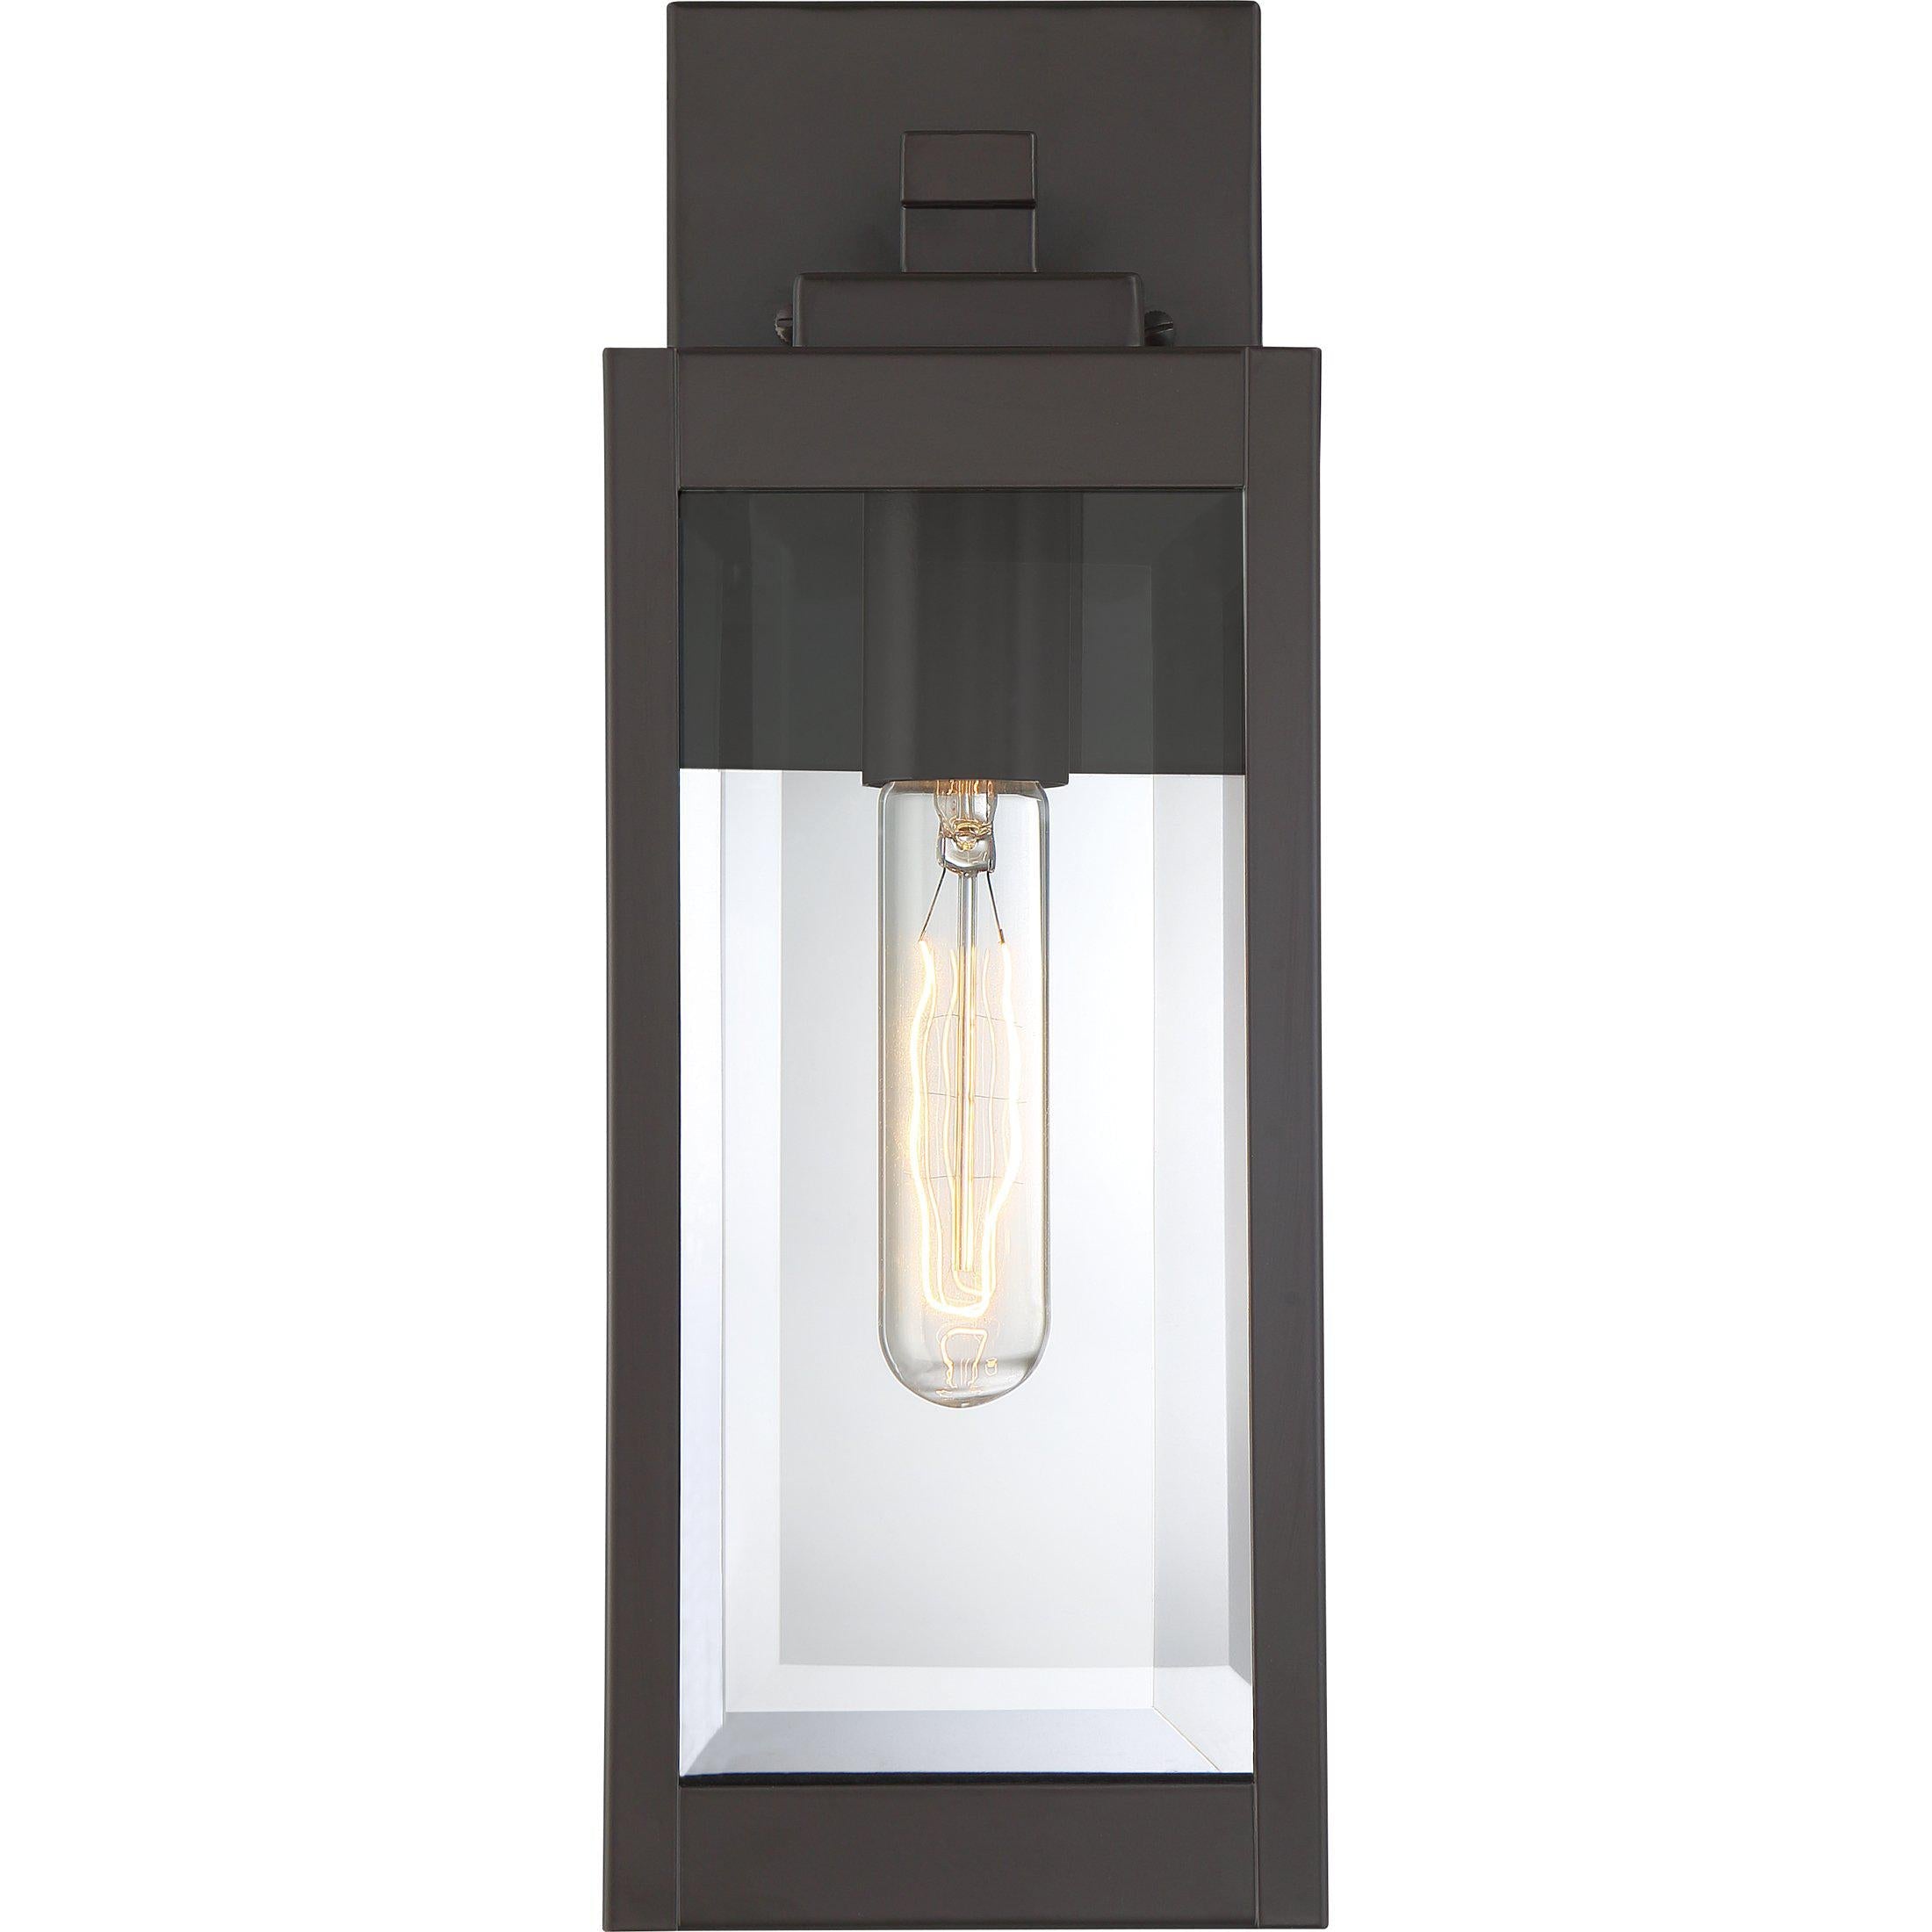 Quoizel Westover Outdoor Lantern, Small WVR8405 | Overstock